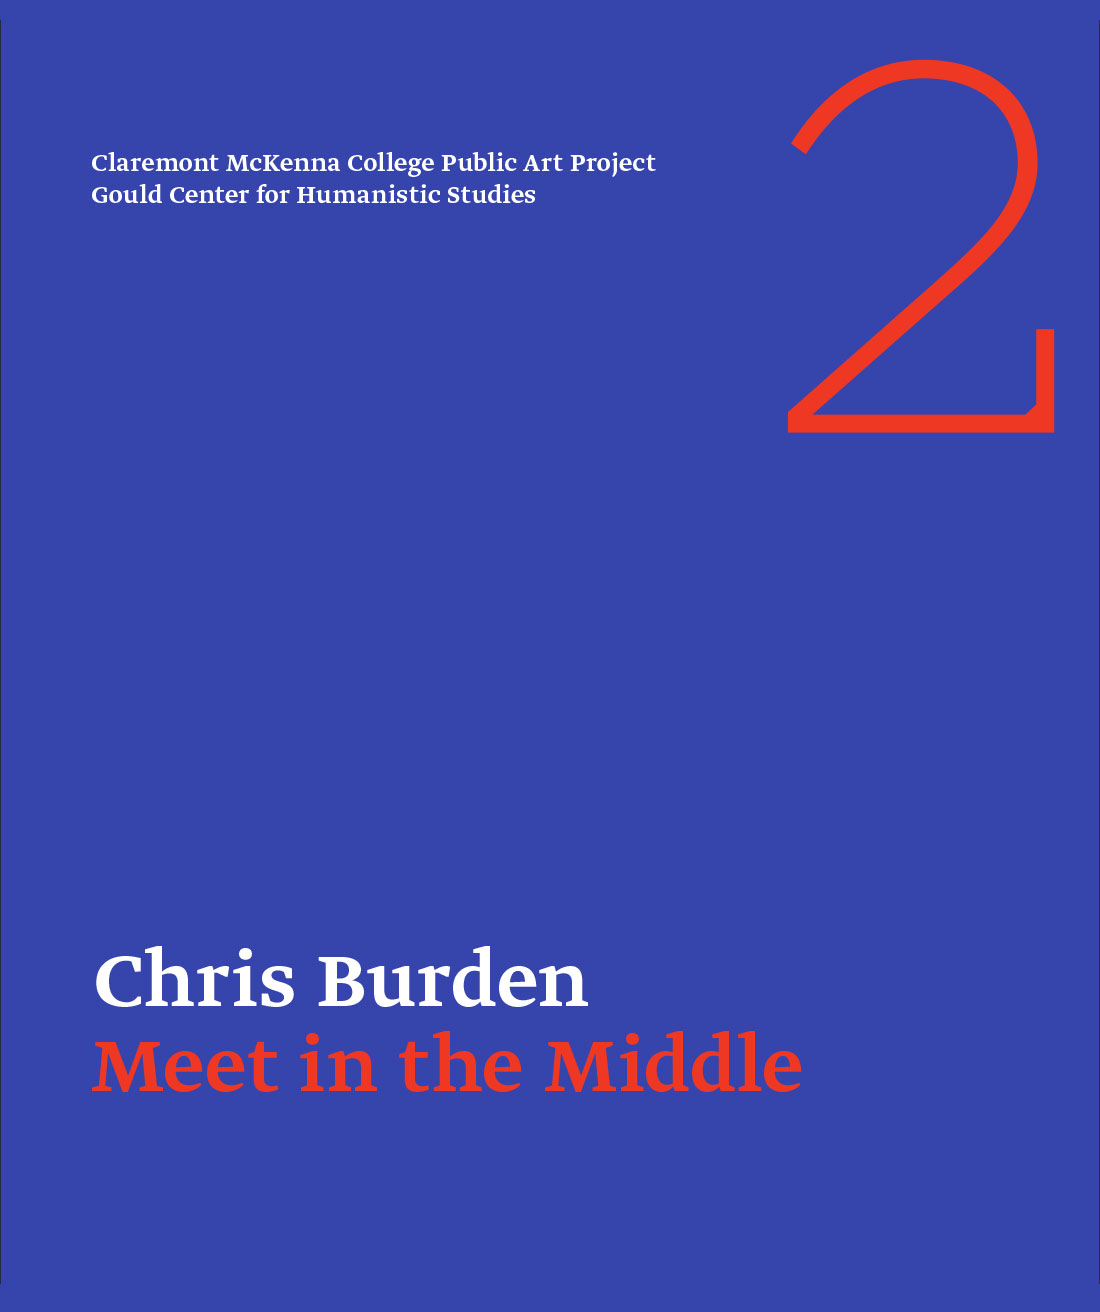 Foreword for Chris Burden's 'Meet in the Middle' piece.